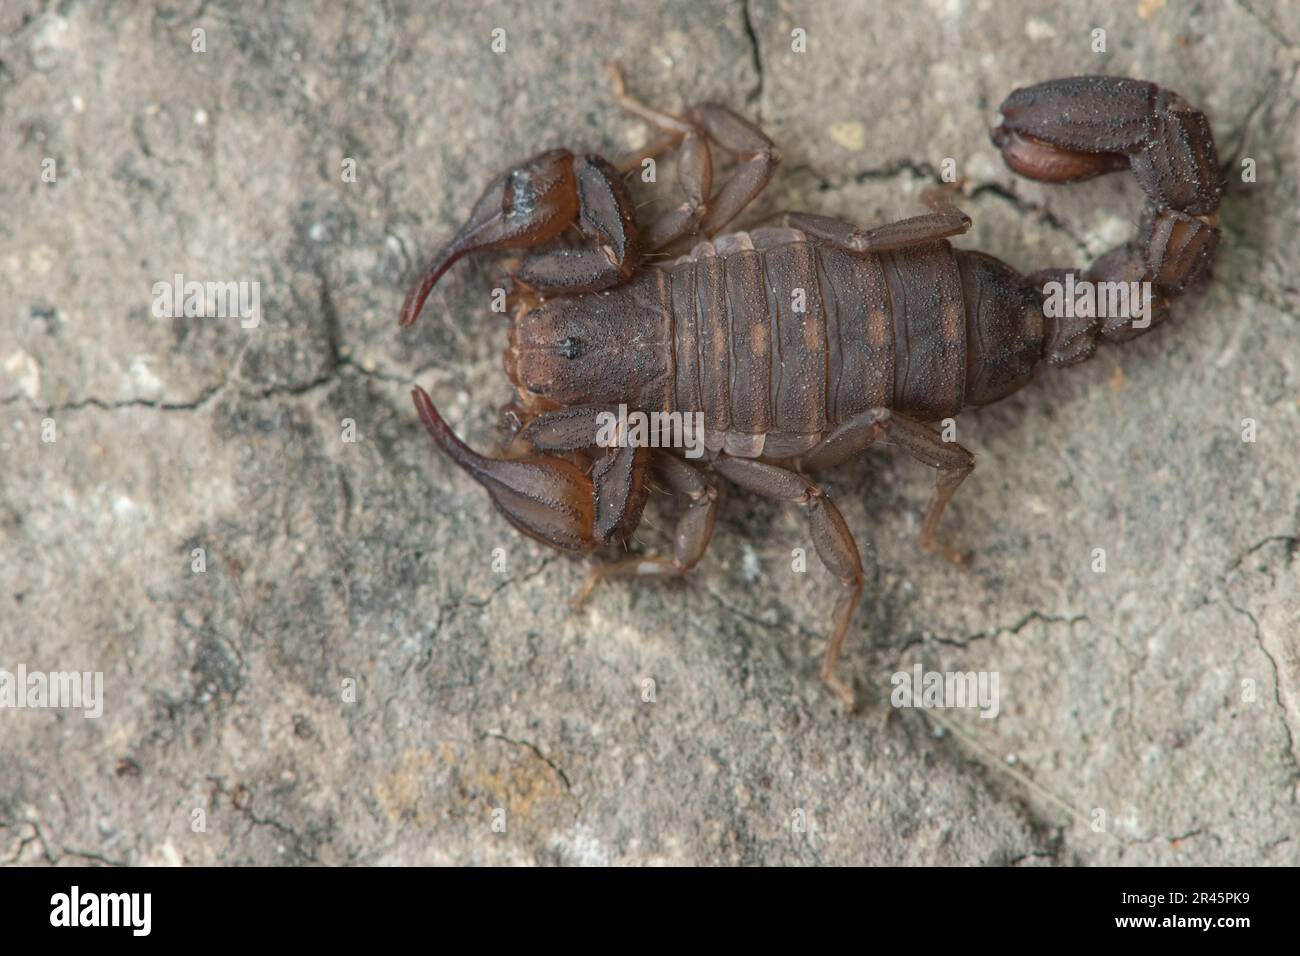 Catalinia thompsoni, a small endemic scorpion species from Santa Cruz island in the Channel islands National Park, California, USA. Stock Photo